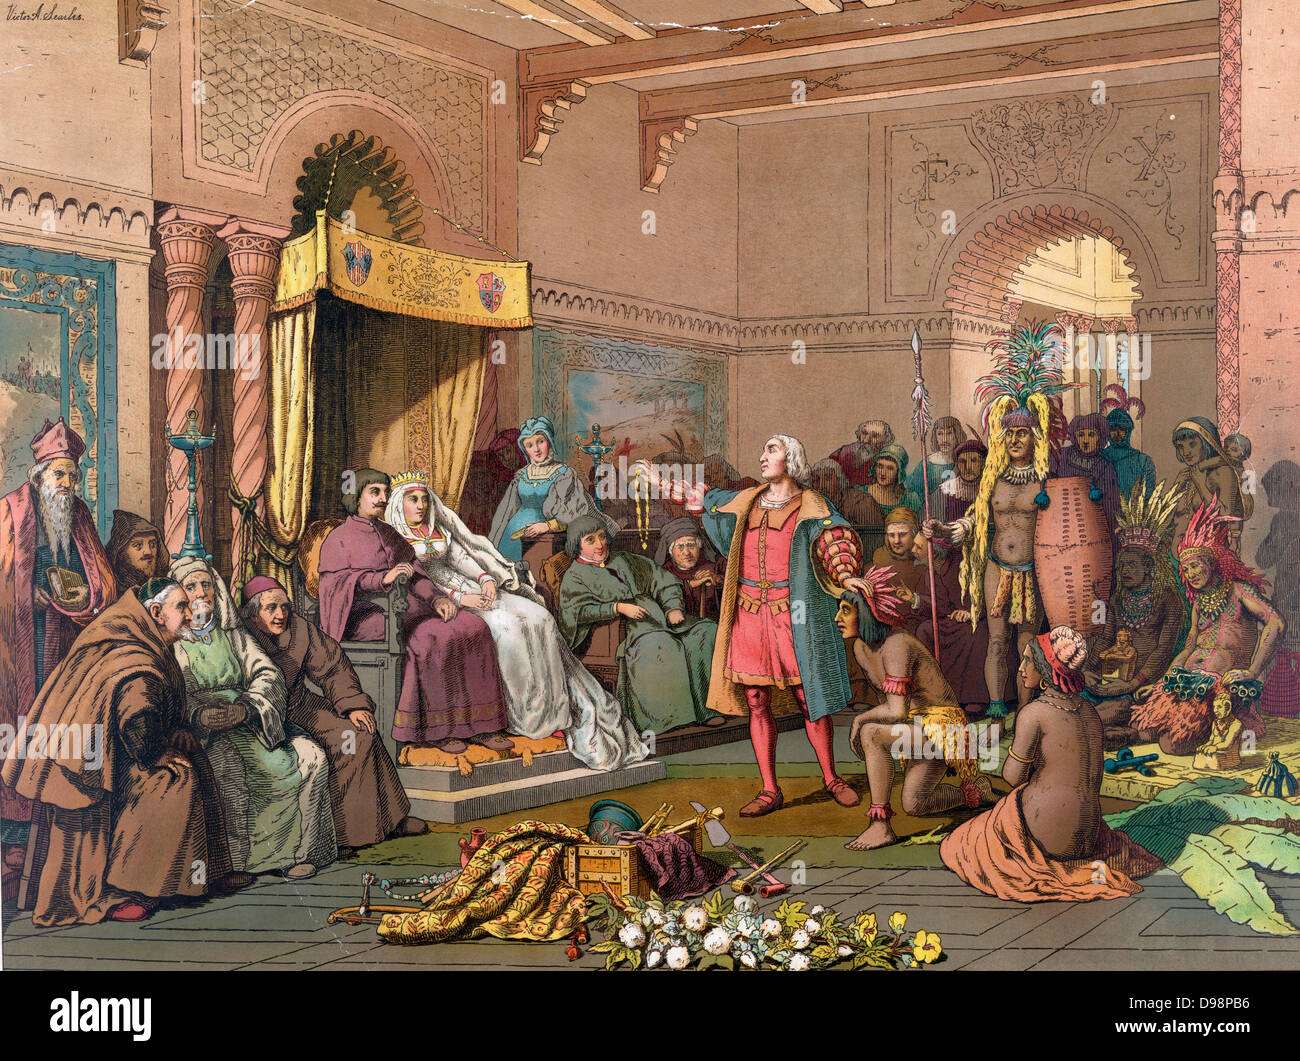 Columbus at the Court of Barcelona' before Ferdinand II of Aragon and Isabella of Castile on his return from his first voyage to the New World, February 1493, presenting treasures and Native Americans. Chromolithograph 1893. Stock Photo